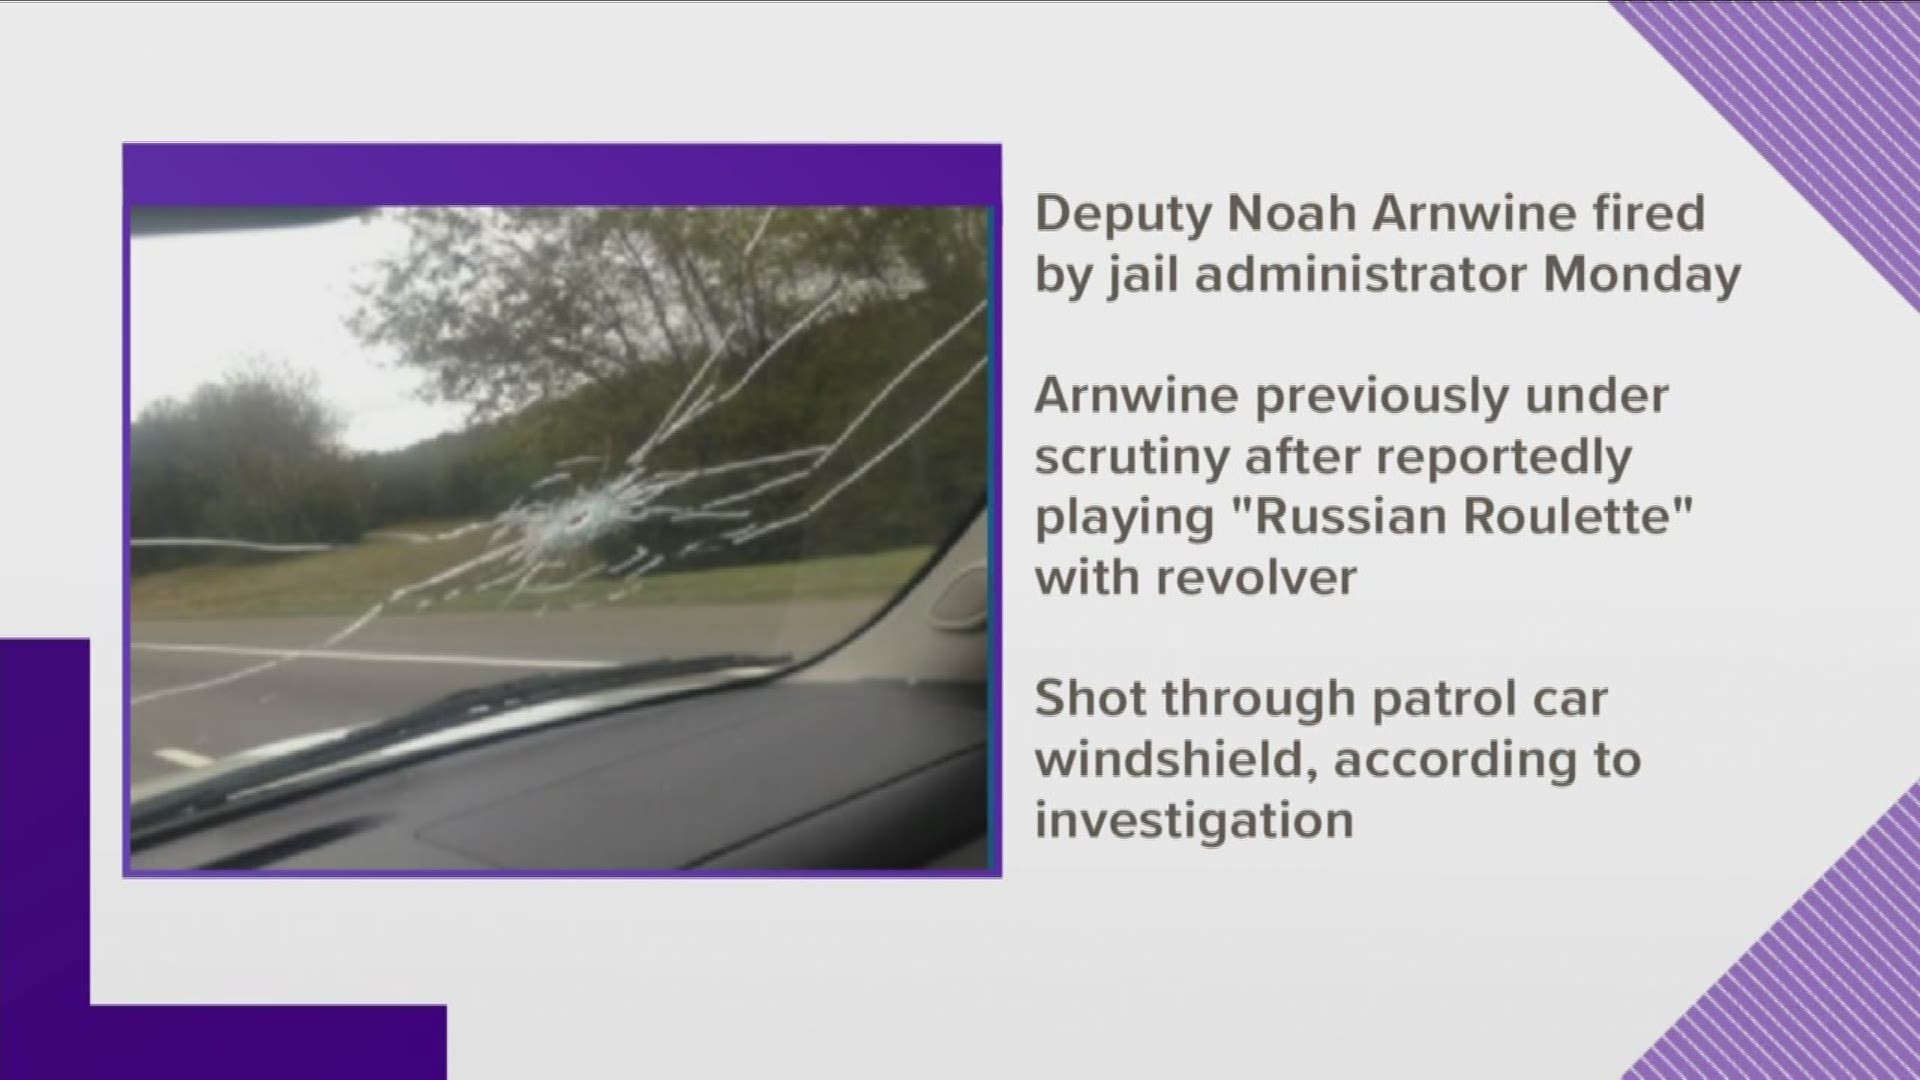 The deputy accused of playing Russian Roulette in a patrol car and firing through the windshield has been fired, officials said Tuesday.